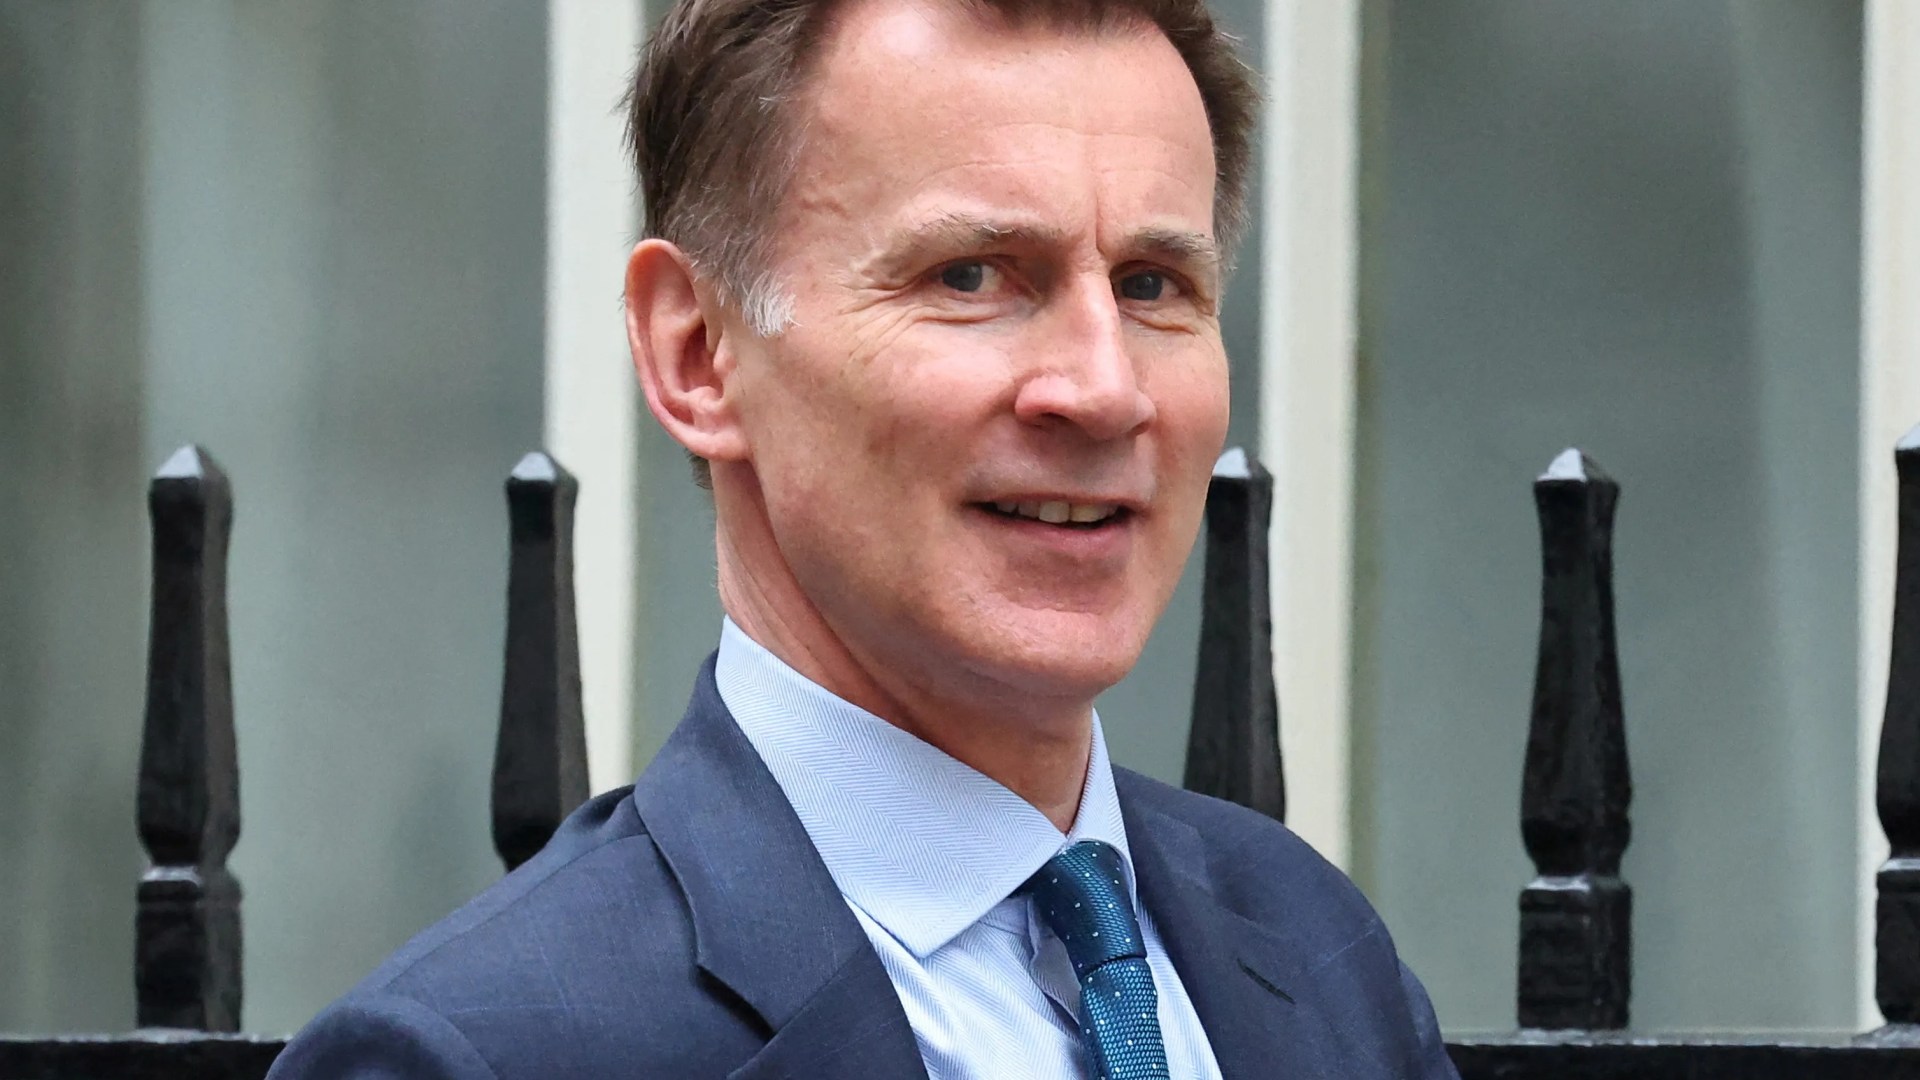 Britain is ‘winning the war’ to fire up the economy despite slugging growth, says Chancellor Jeremy Hunt [Video]